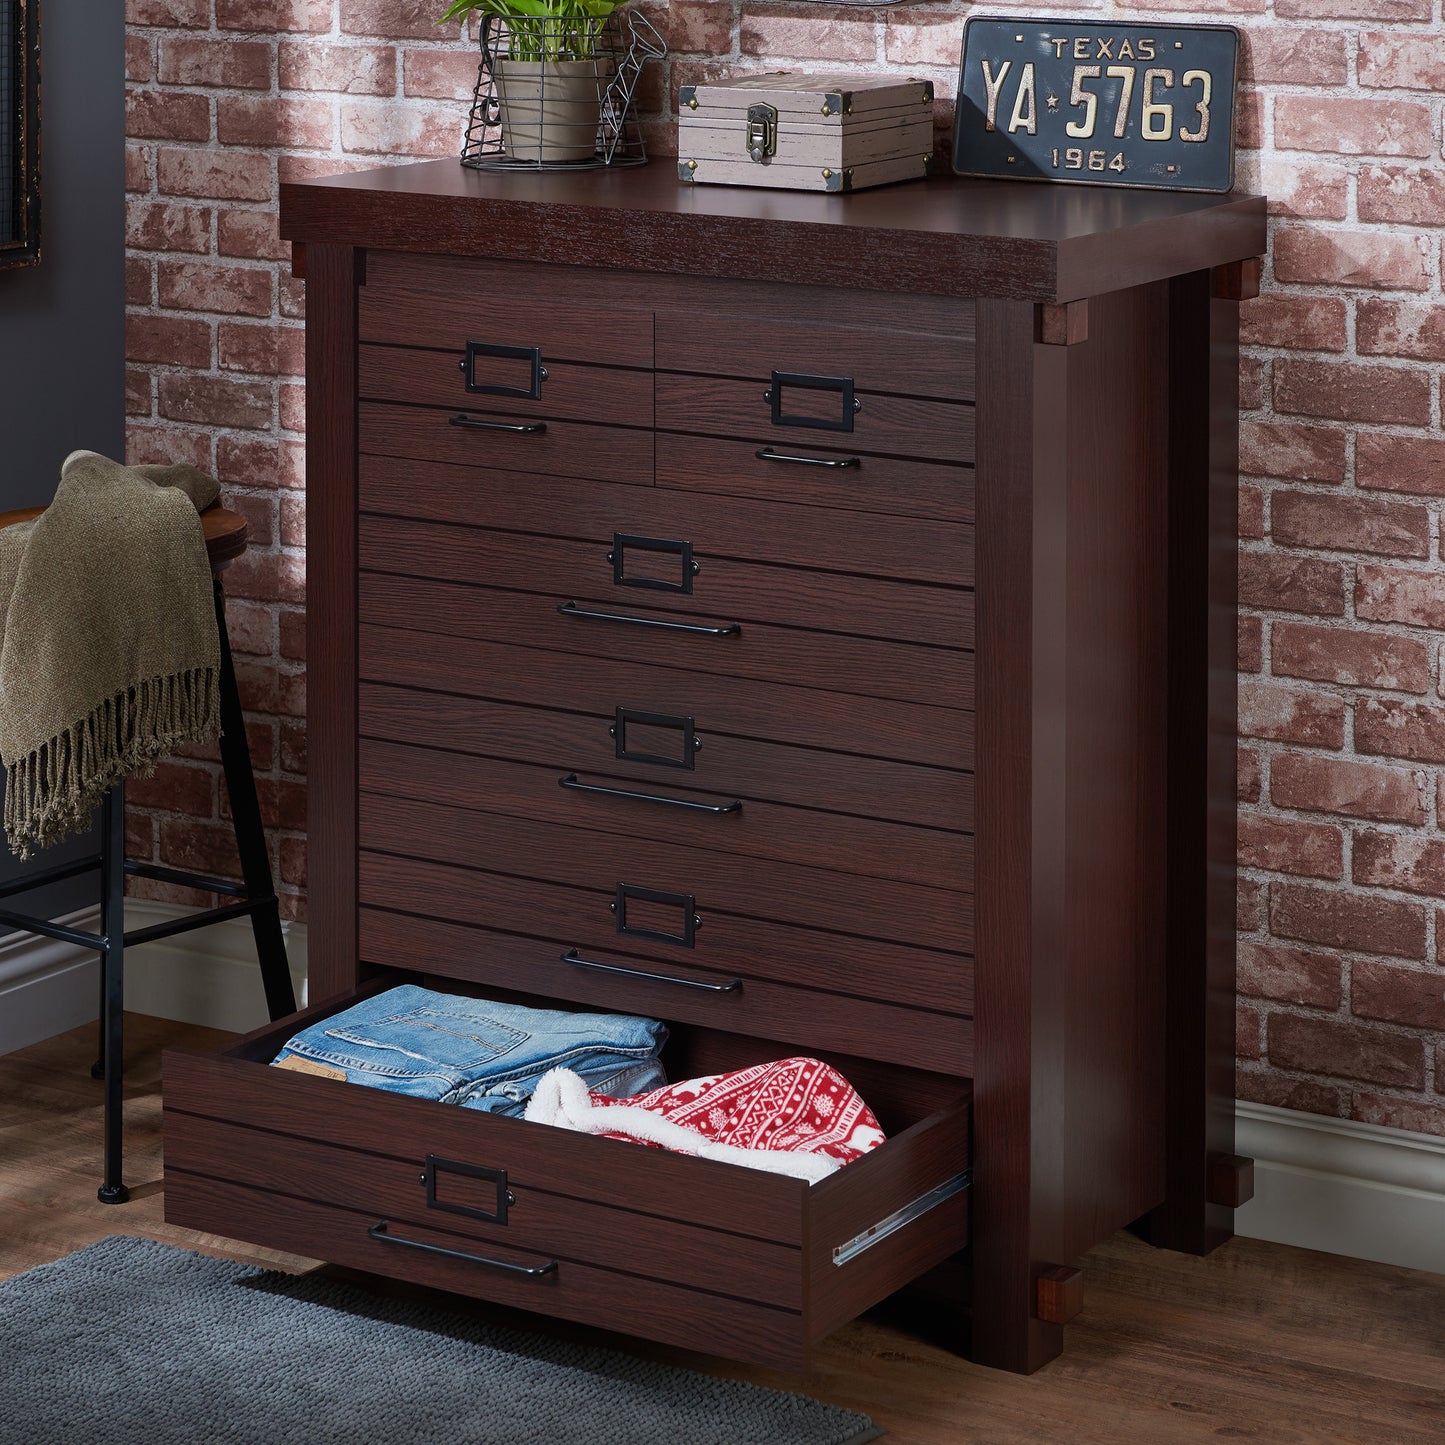 Left angled rustic espresso six-drawer plank chest dresser with bottom drawer open in a living space with accessories